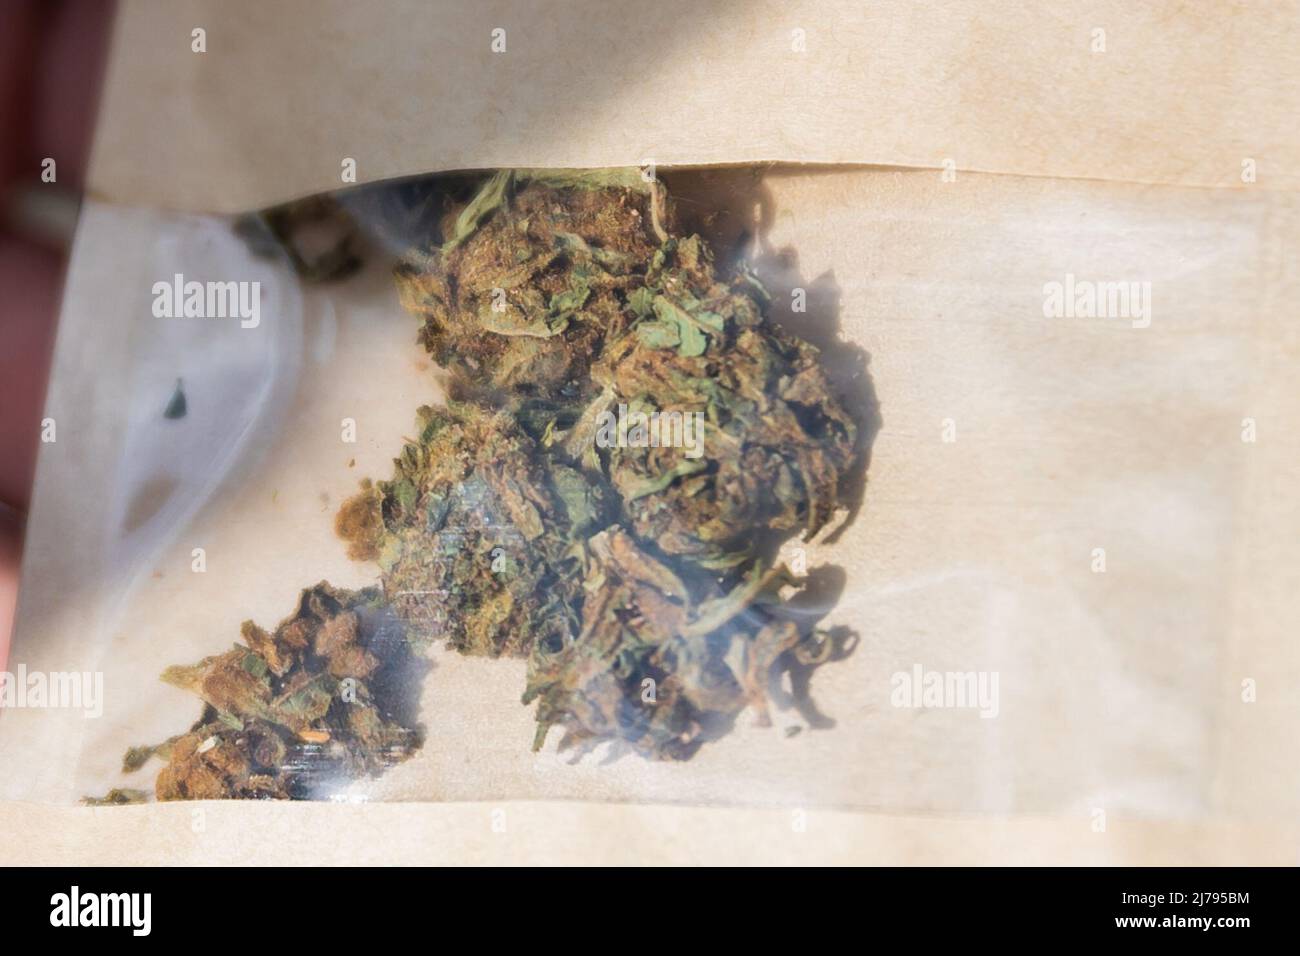 07 May 2022, Berlin: Cannabis flowers are seen in a bag at the Brandenburg Gate during the kick-off rally of a demonstration for the swift legalization of cannabis, the Global Marijuana March 2022. Photo: Christoph Soeder/dpa Stock Photo